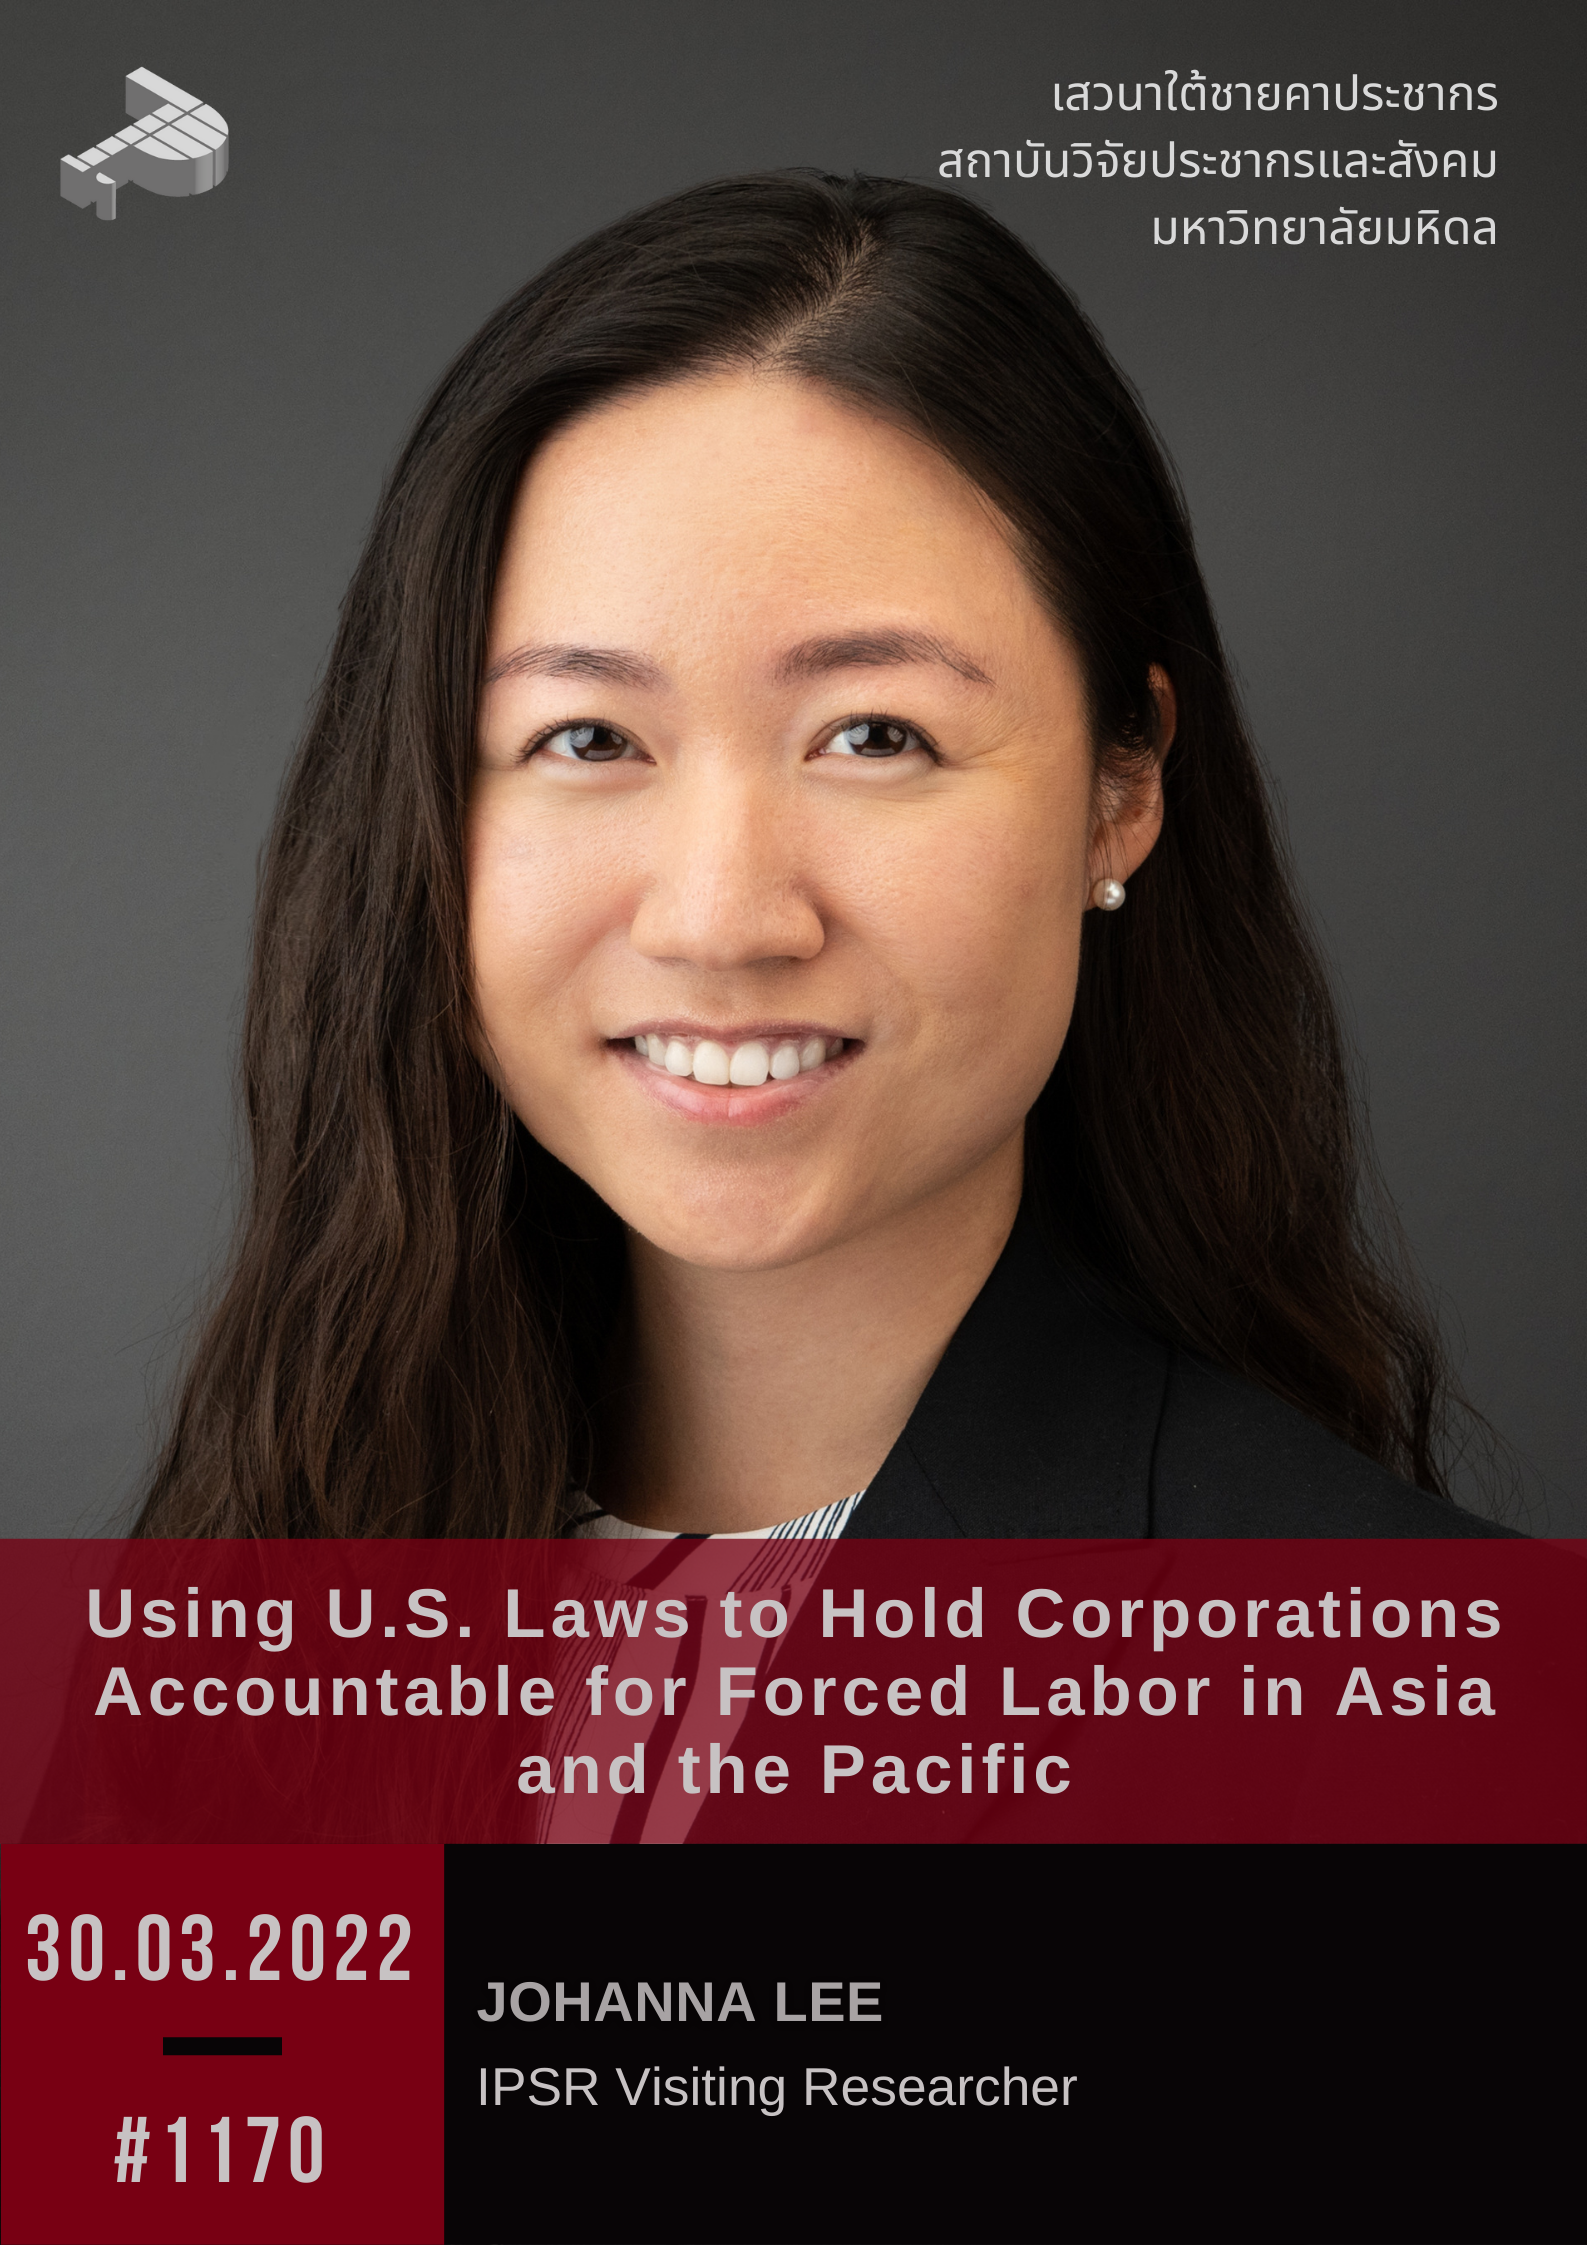 Using U.S. Laws to Hold Corporations Accountable for Forced Labor in Asia and the Pacific